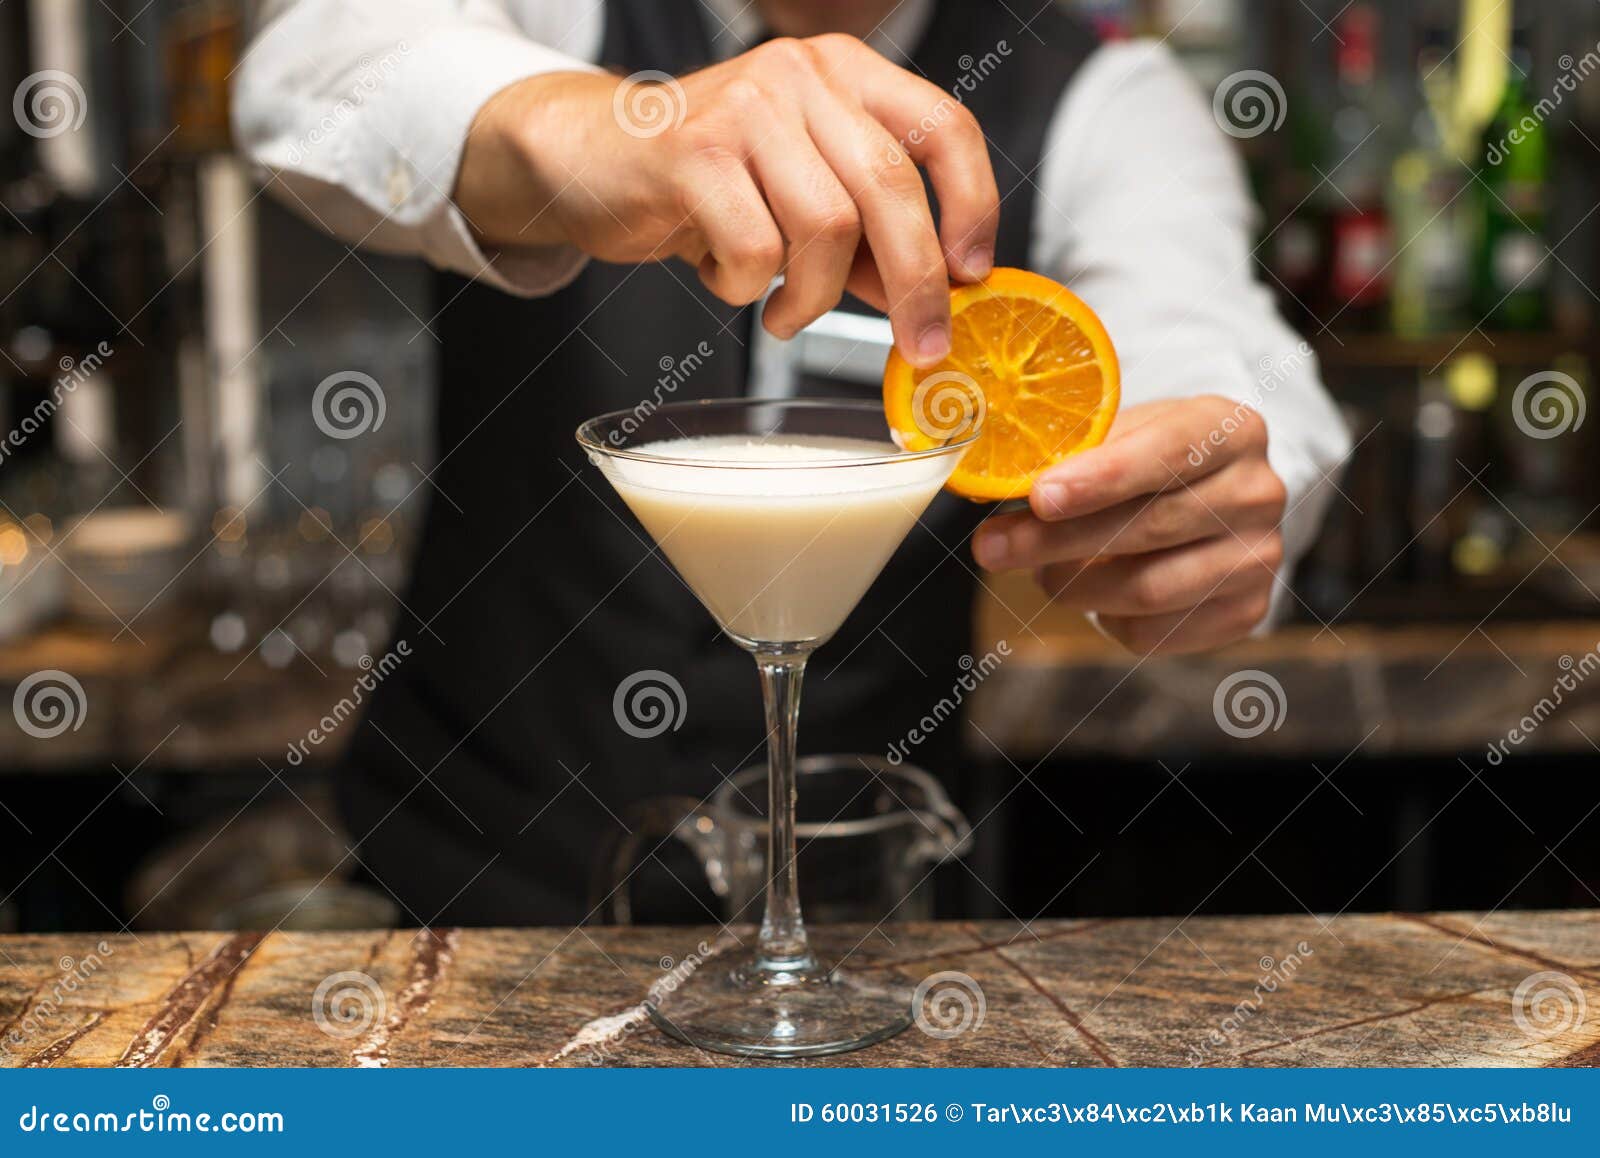 barman at work, preparing cocktails. pouring pina colada to cocktail glass.